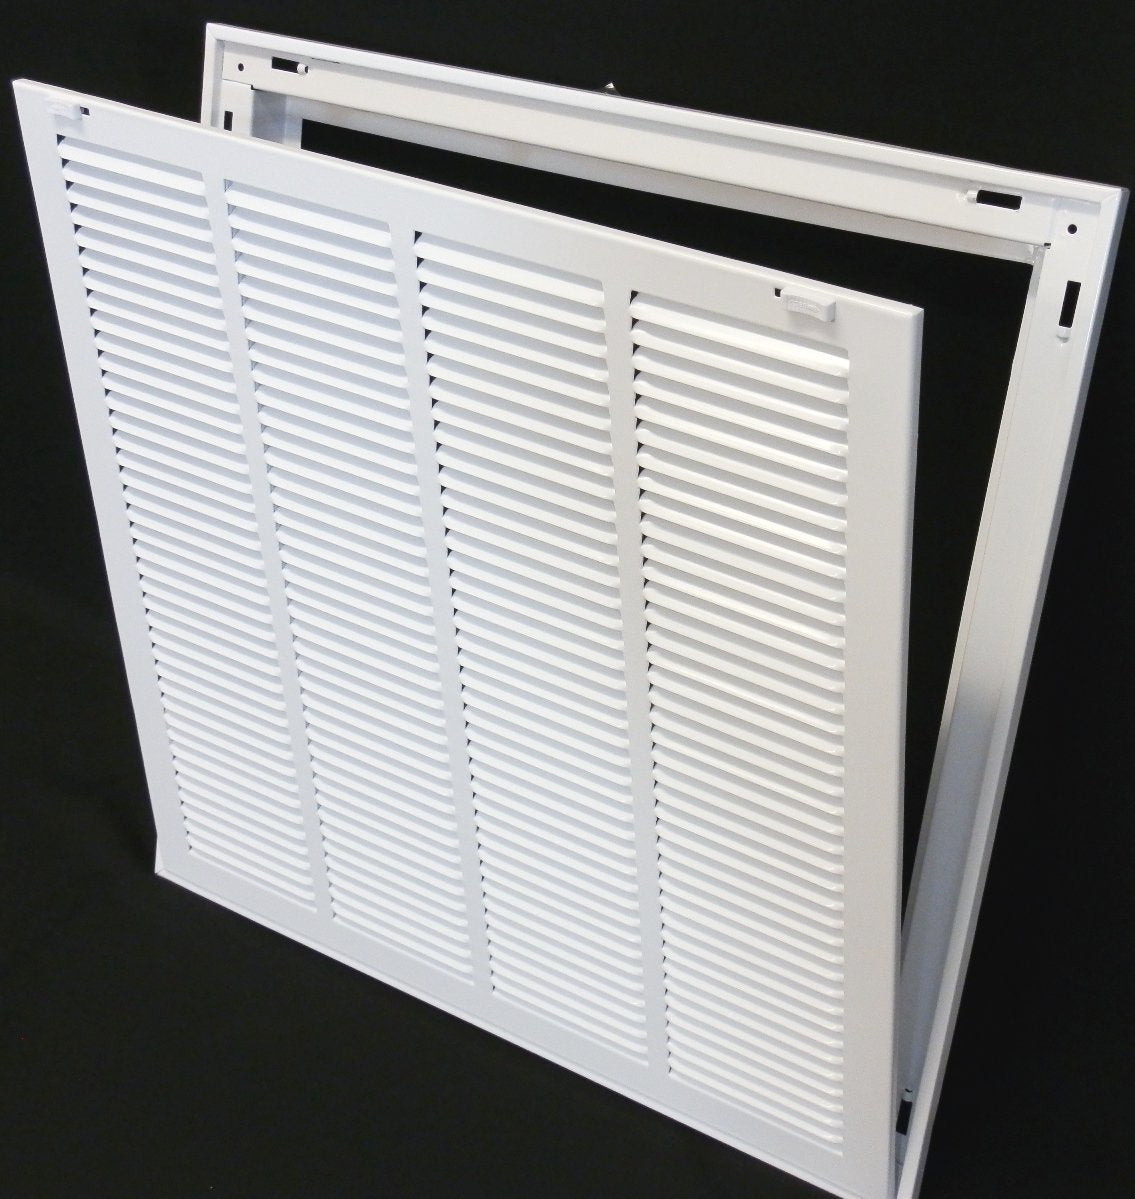 25&quot; X 34&quot; Steel Return Air Filter Grille for 1&quot; Filter - Removable Frame - [Outer Dimensions: 27 5/8&quot; X 36 5/8&quot;]